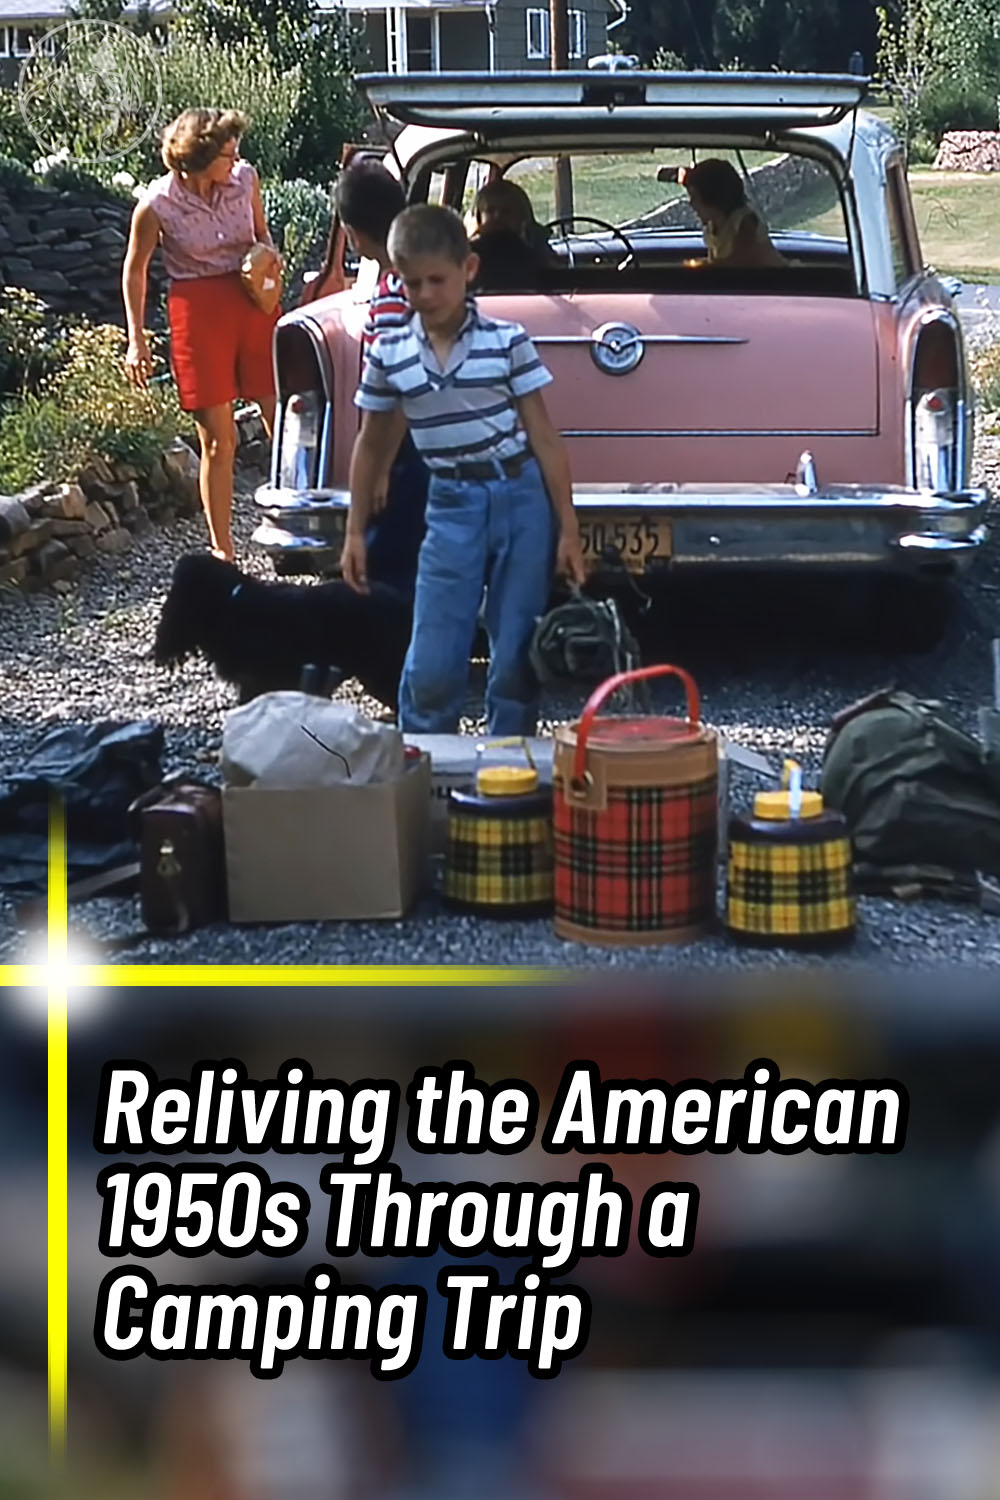 Reliving the American 1950s Through a Camping Trip